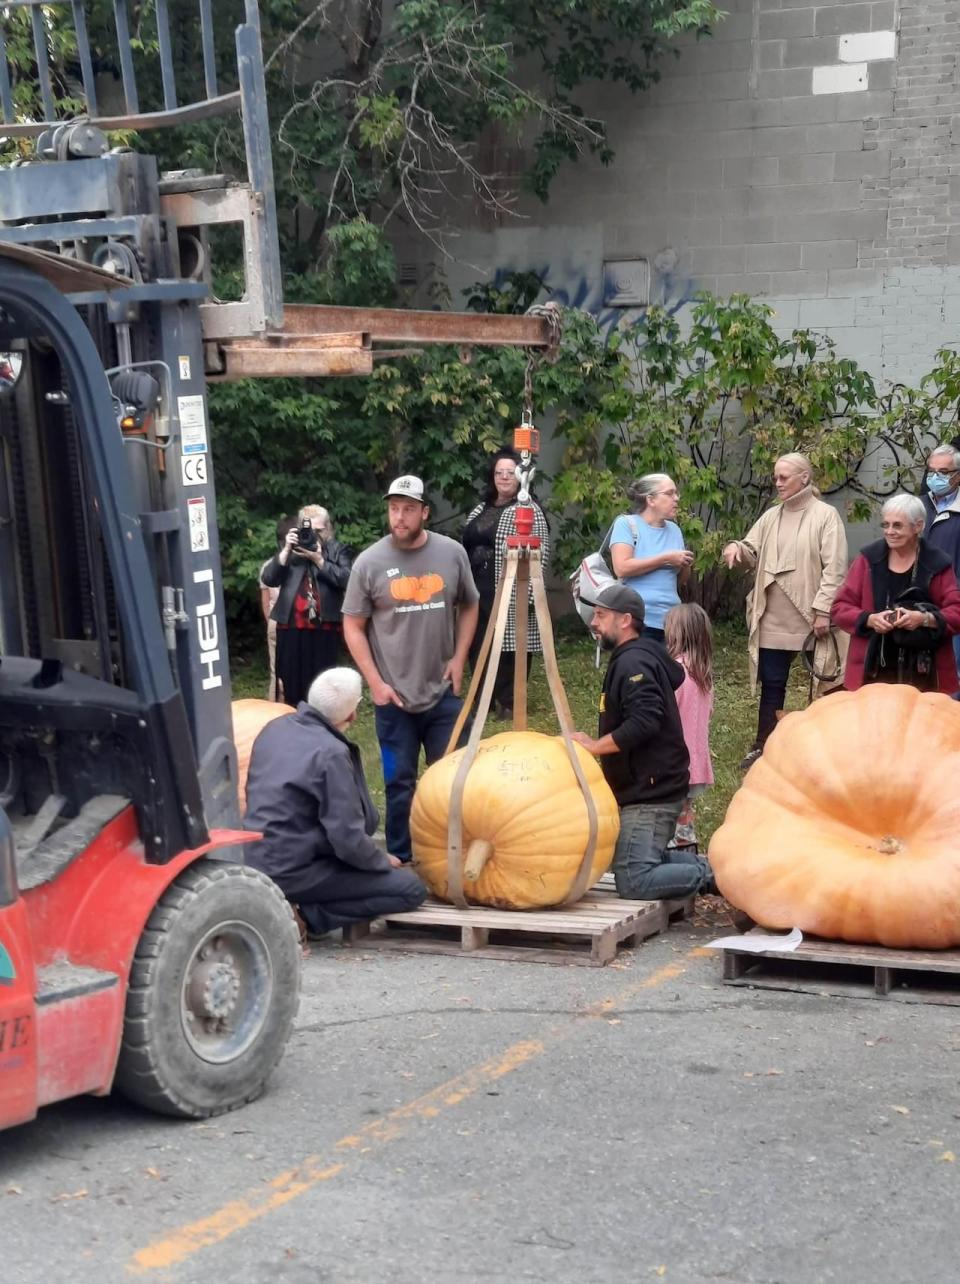 Every year, farmers have a giant pumpkin weight-off to see who can grow the biggest, heaviest vegetable.